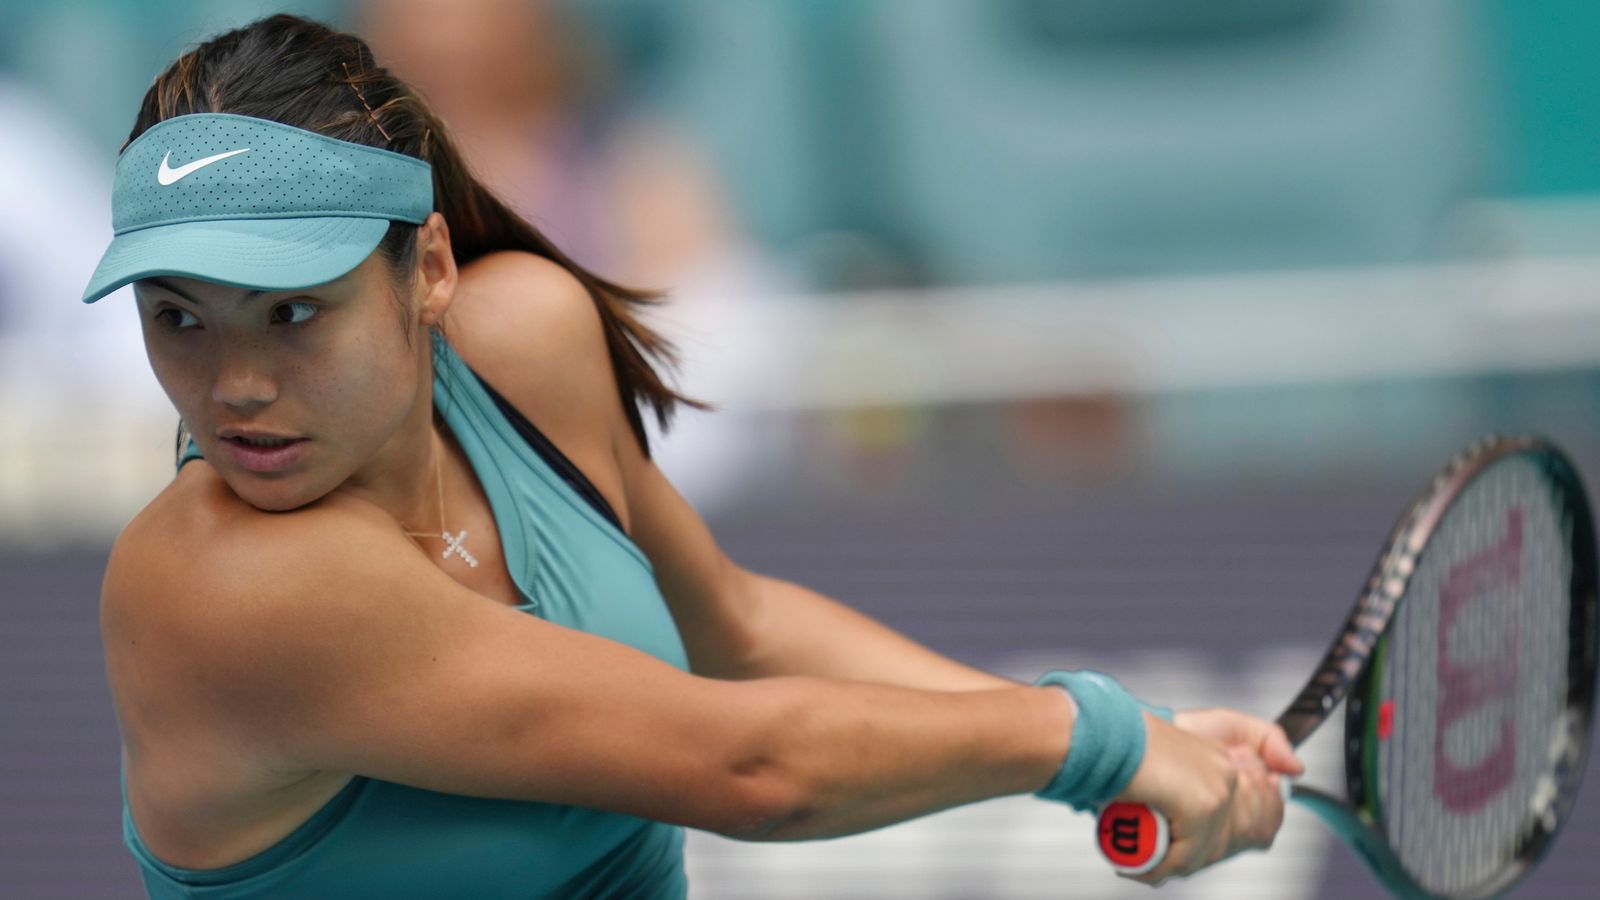 Emma Raducanu beaten in first round of Miami Open by fellow former US Open champion Bianca Andreescu Tennis News Sky Sports